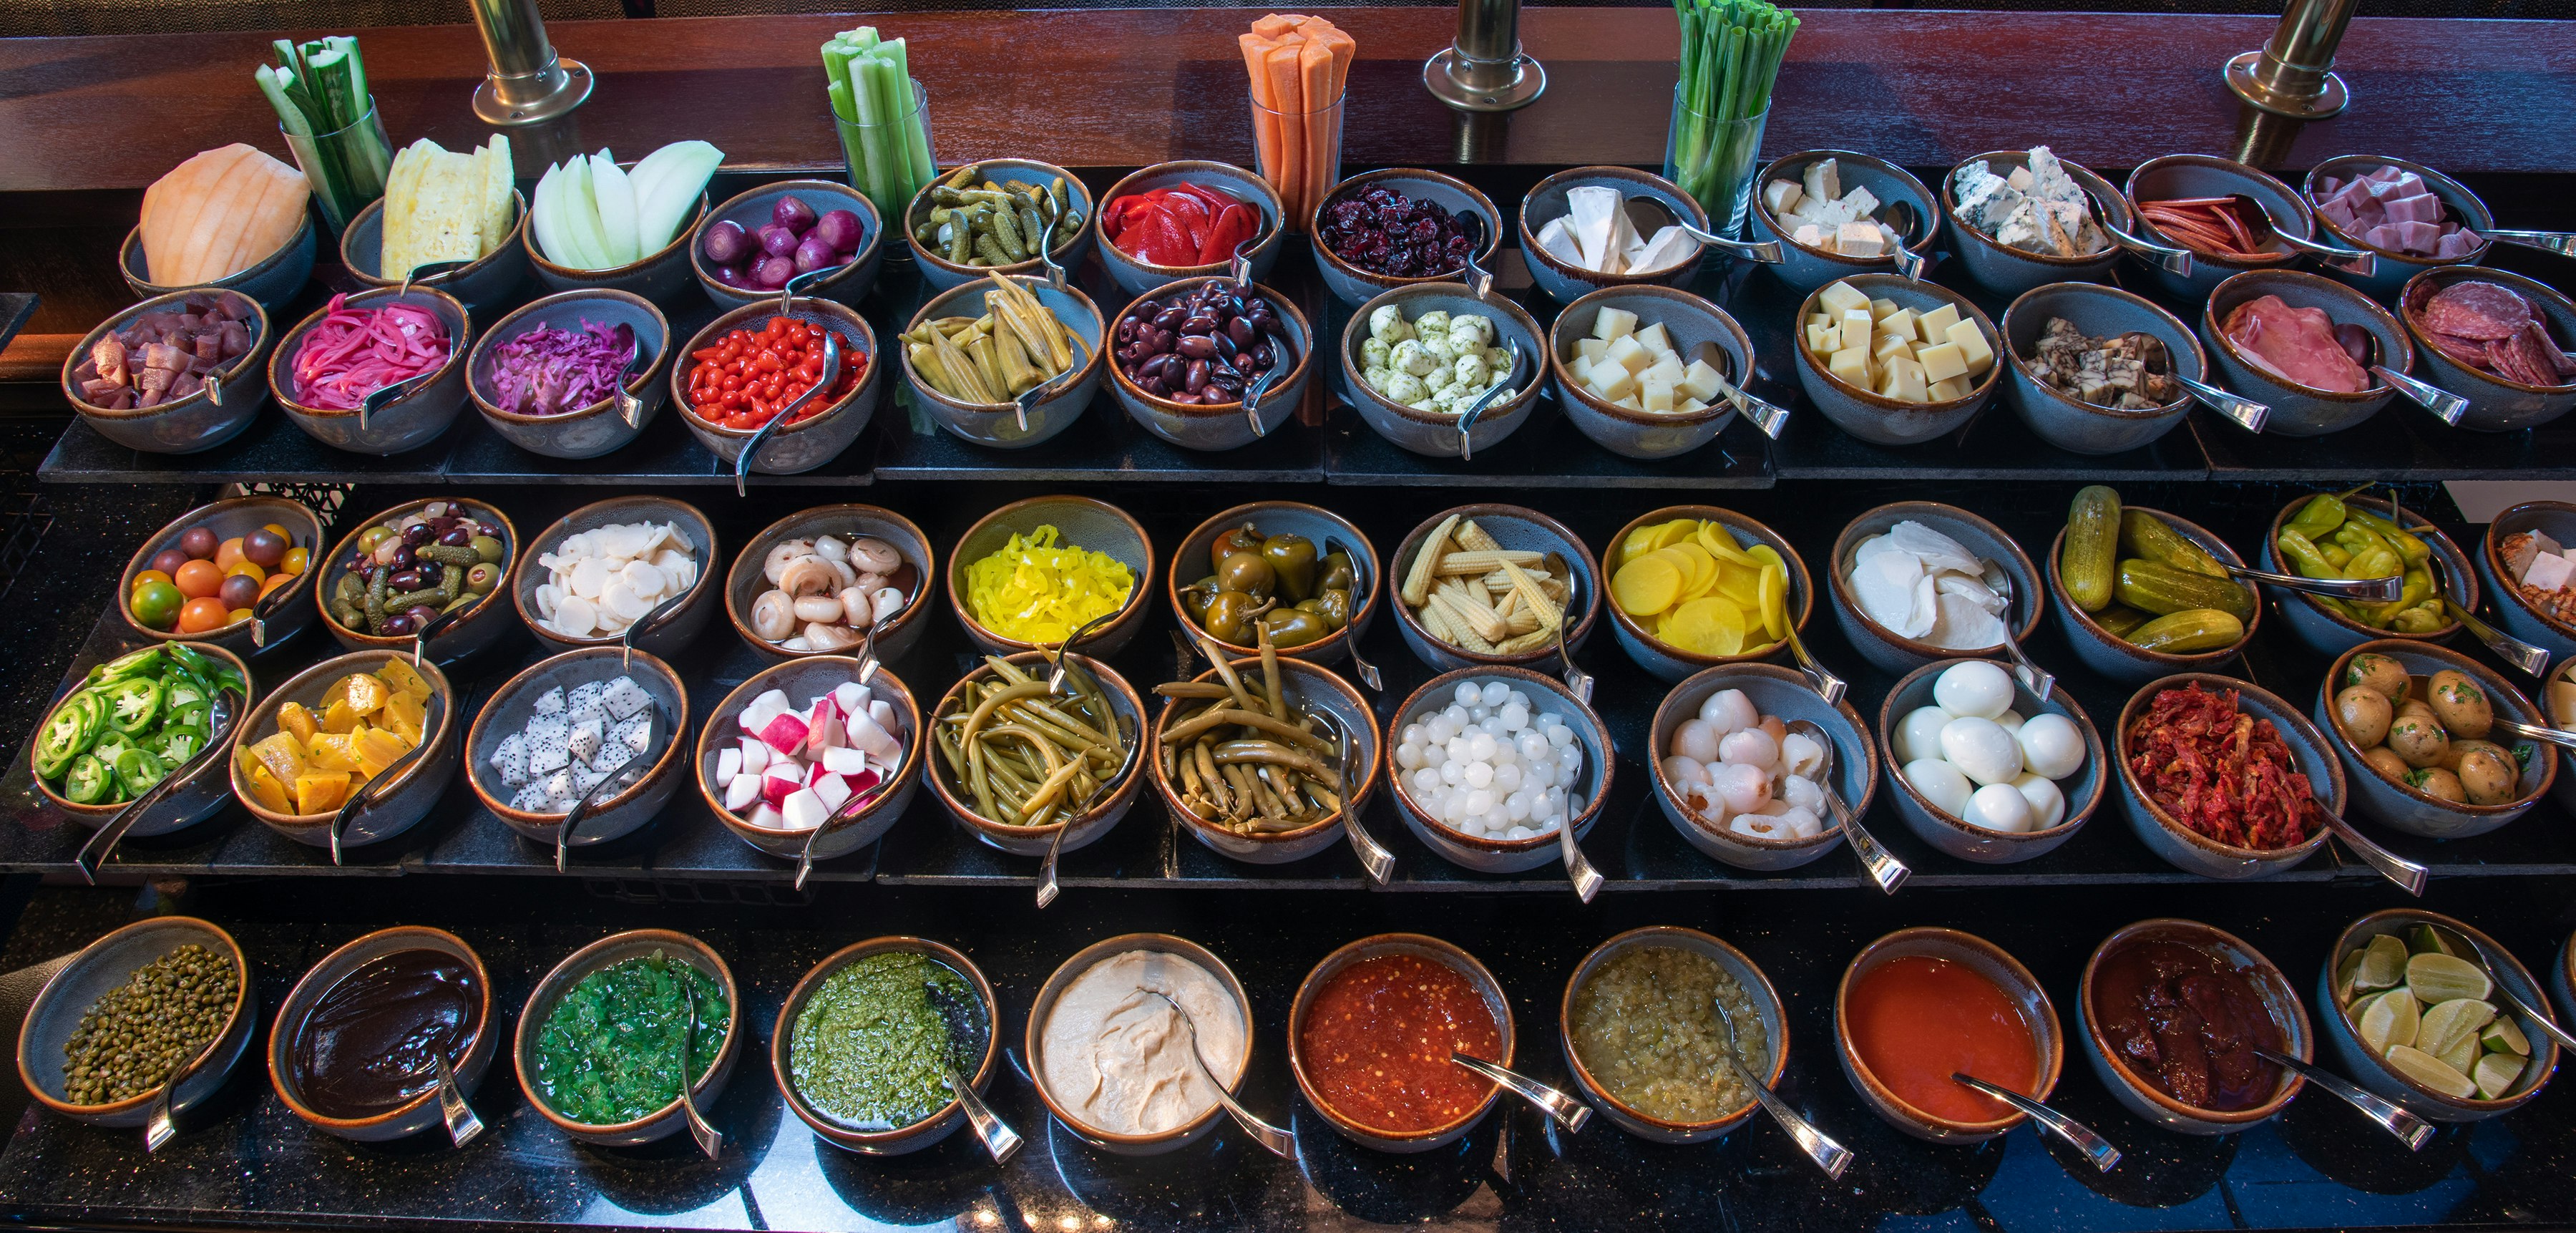 A shot of the complete toppings section of the Bloody Mary bar